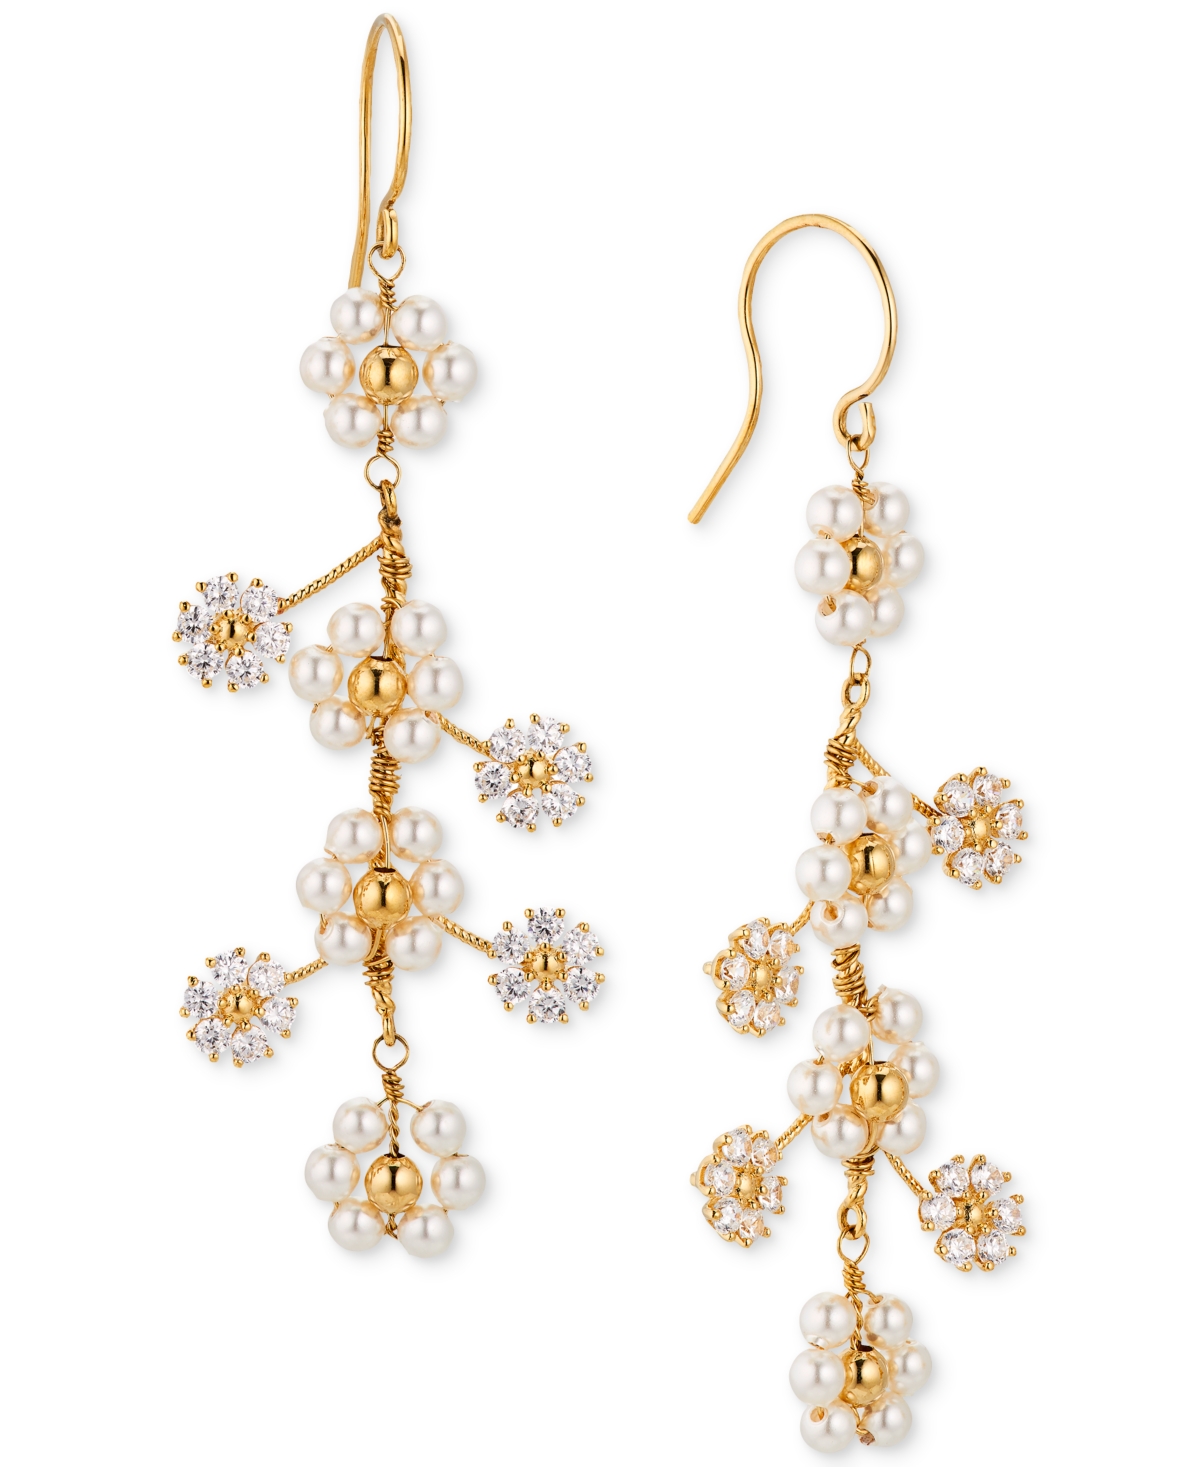 Ajoa By Nadri 18k Gold-plated Cubic Zirconia & Imitation Pearl Flower Statement Earrings